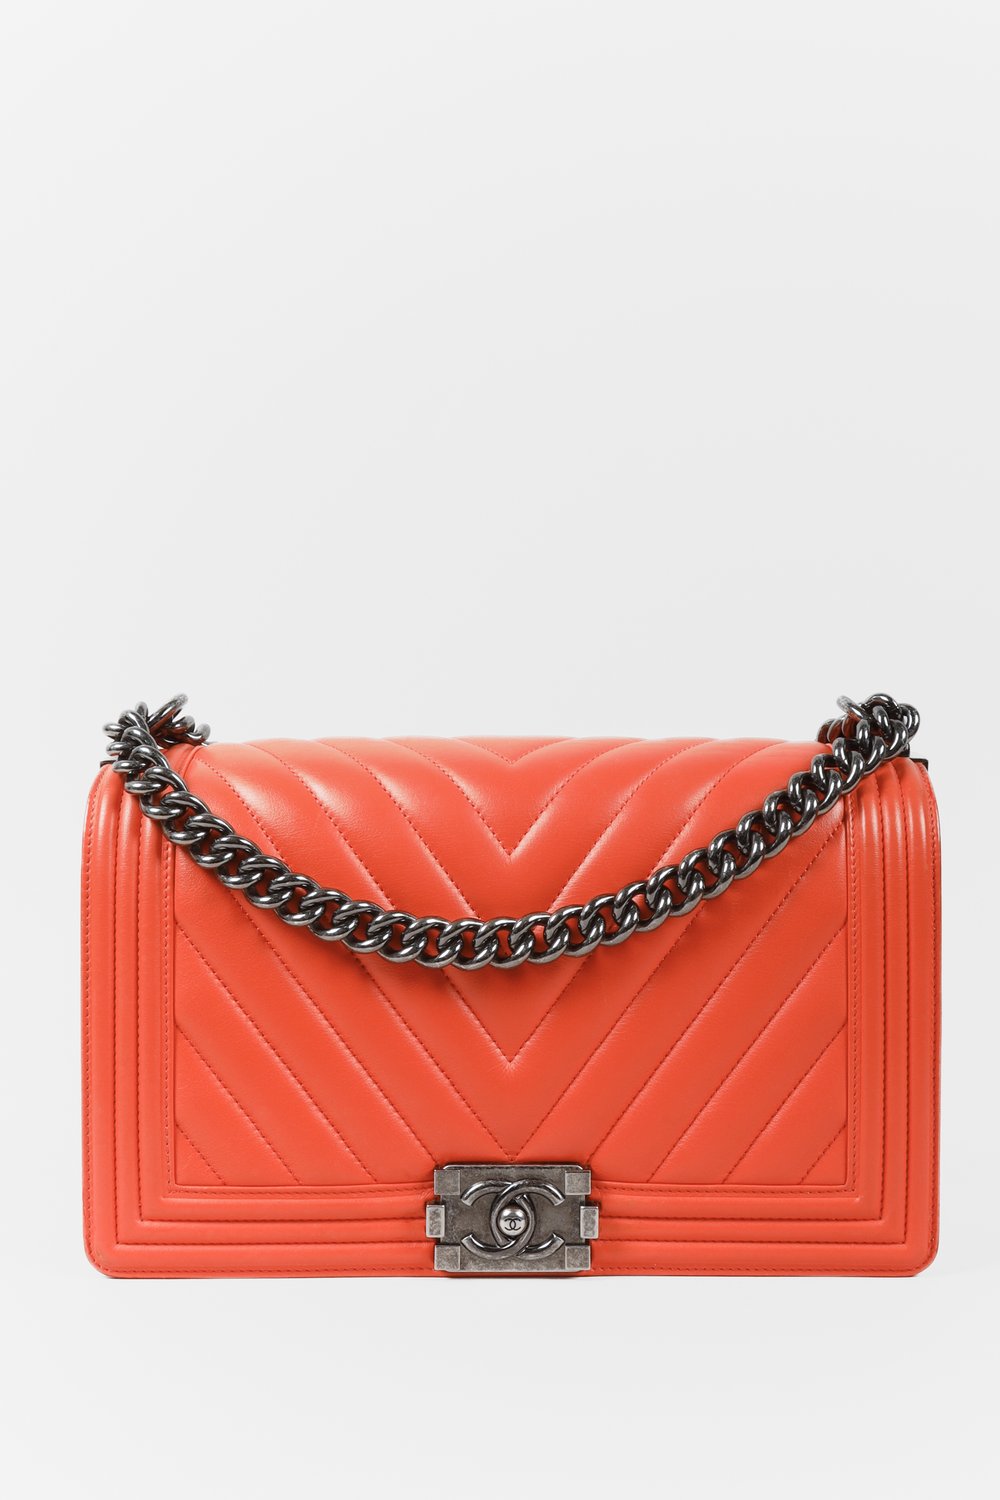 Chanel Coral Chevron Quilted New Medium Boy Bag — BLOGGER ARMOIRE